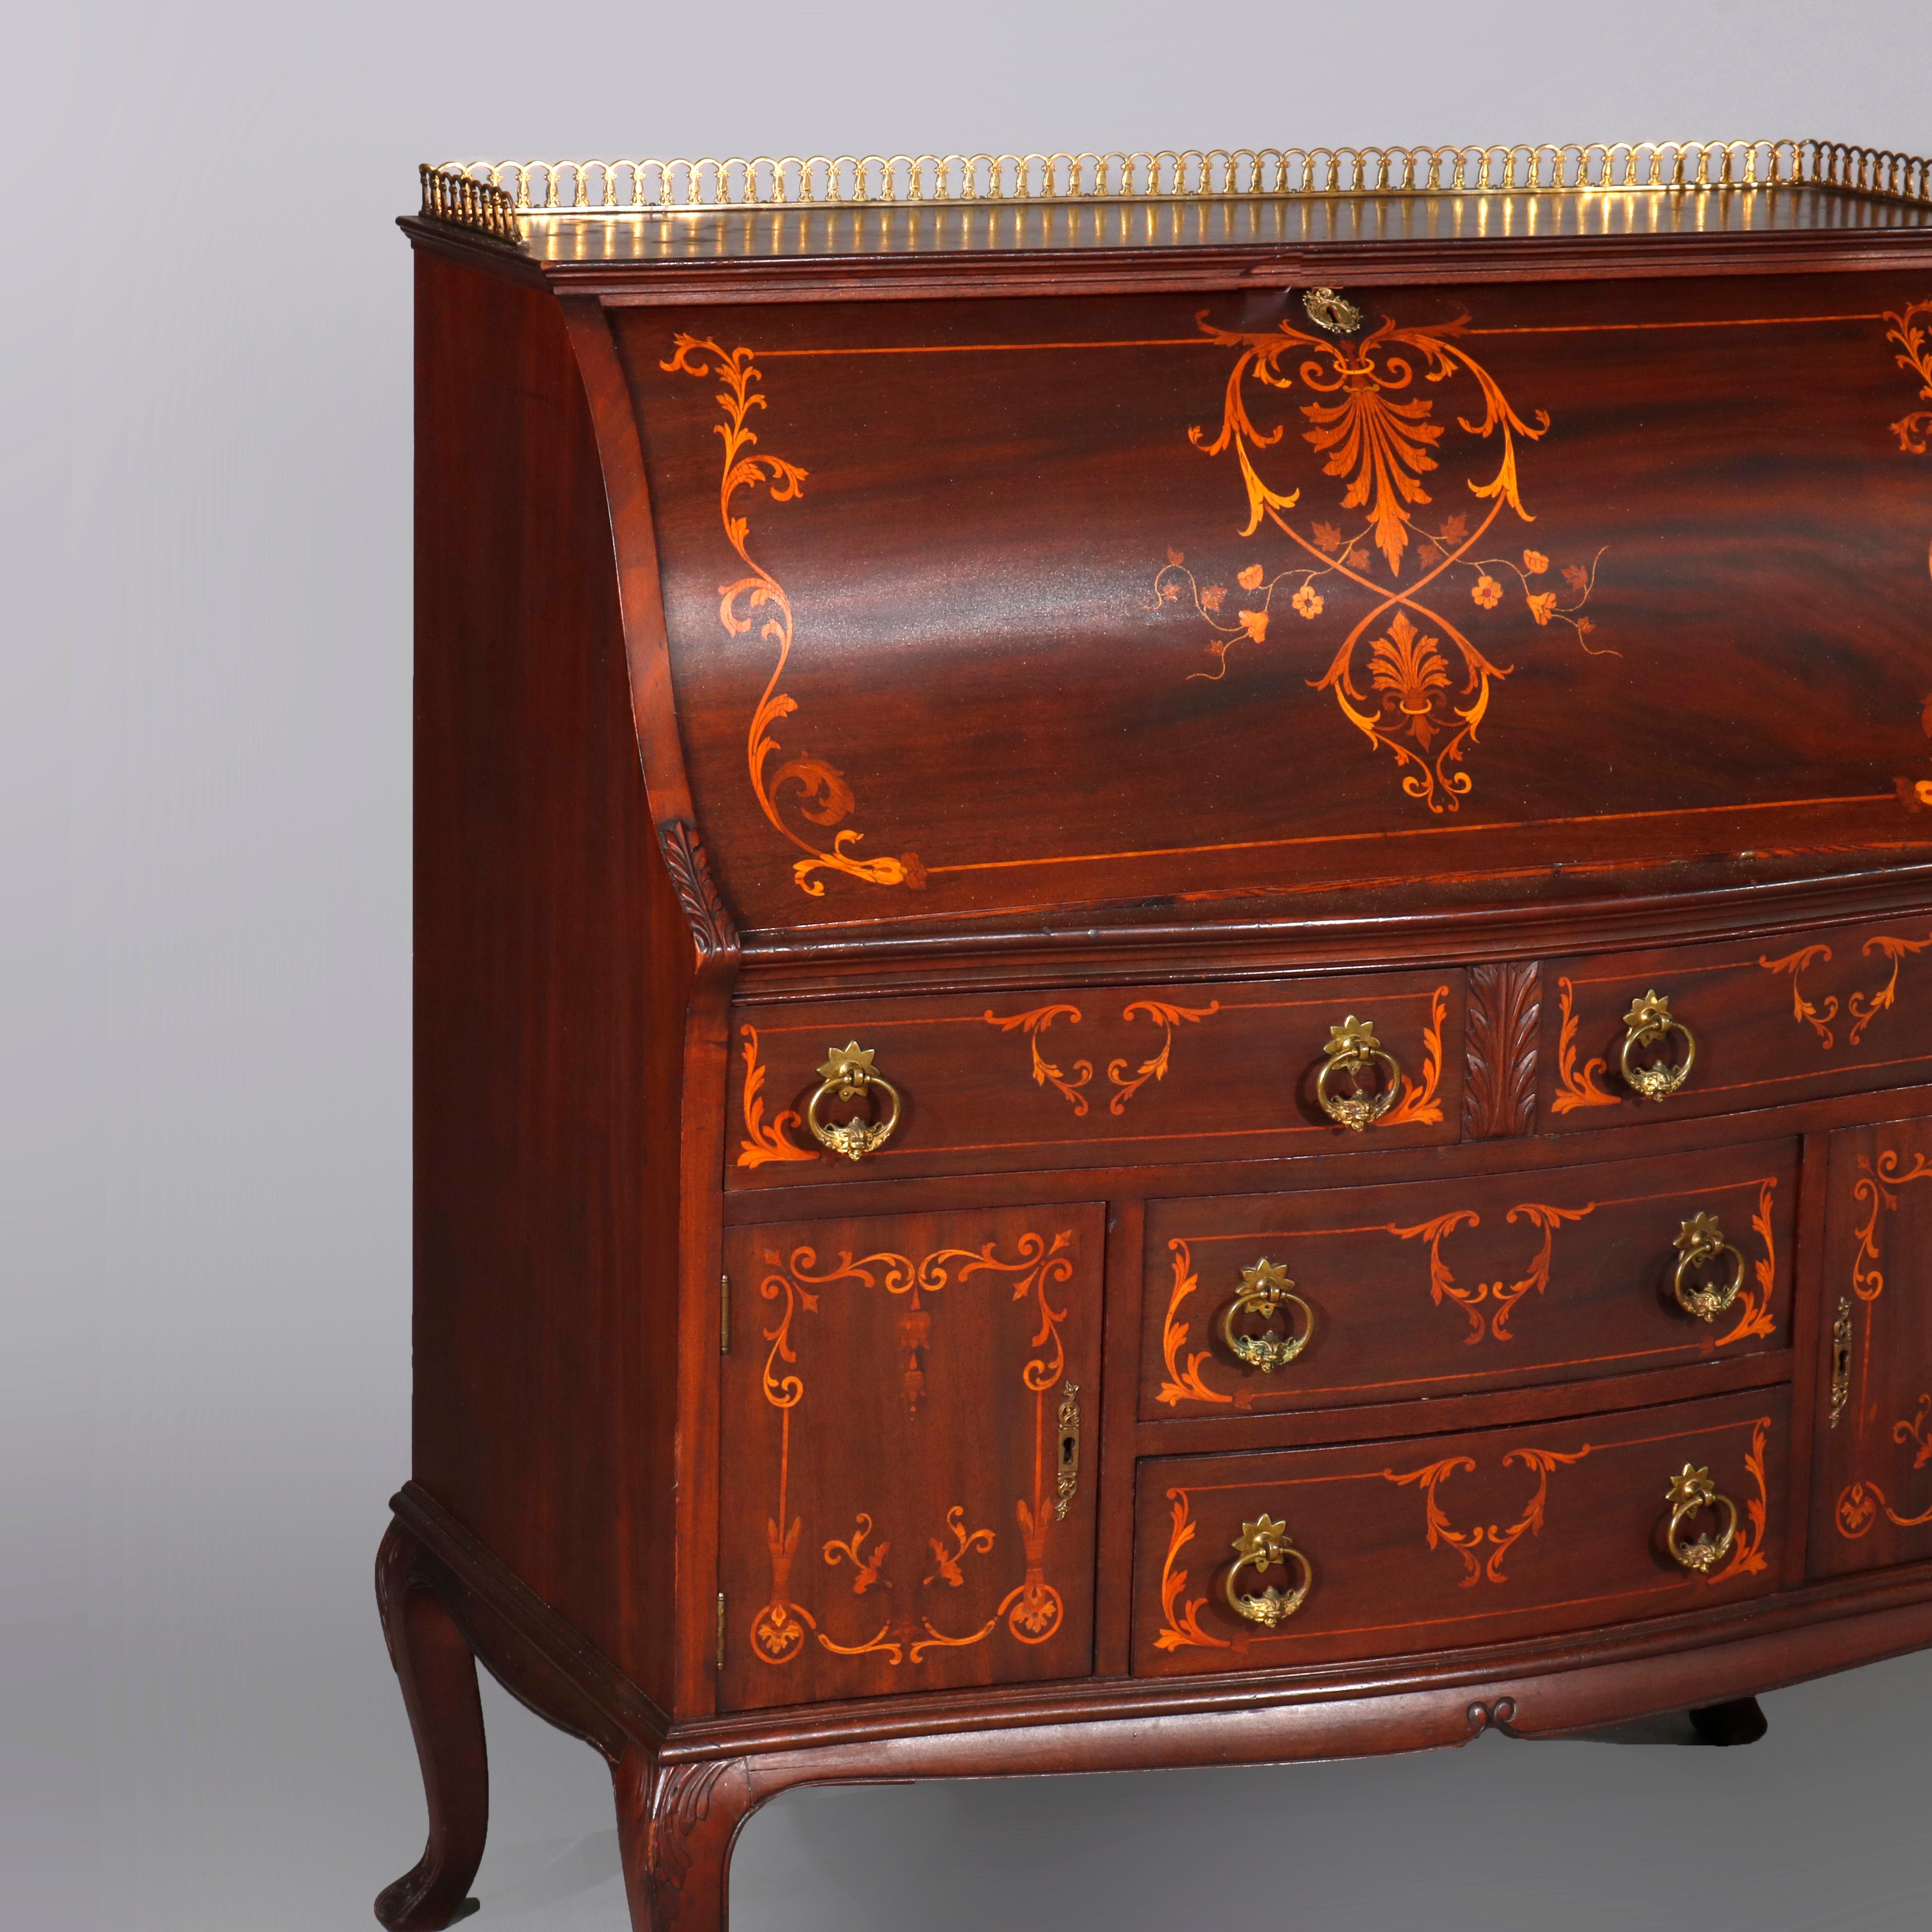 American French RJ Horner Style Mahogany and Satinwood Inlaid Drop Front Desk, circa 1900